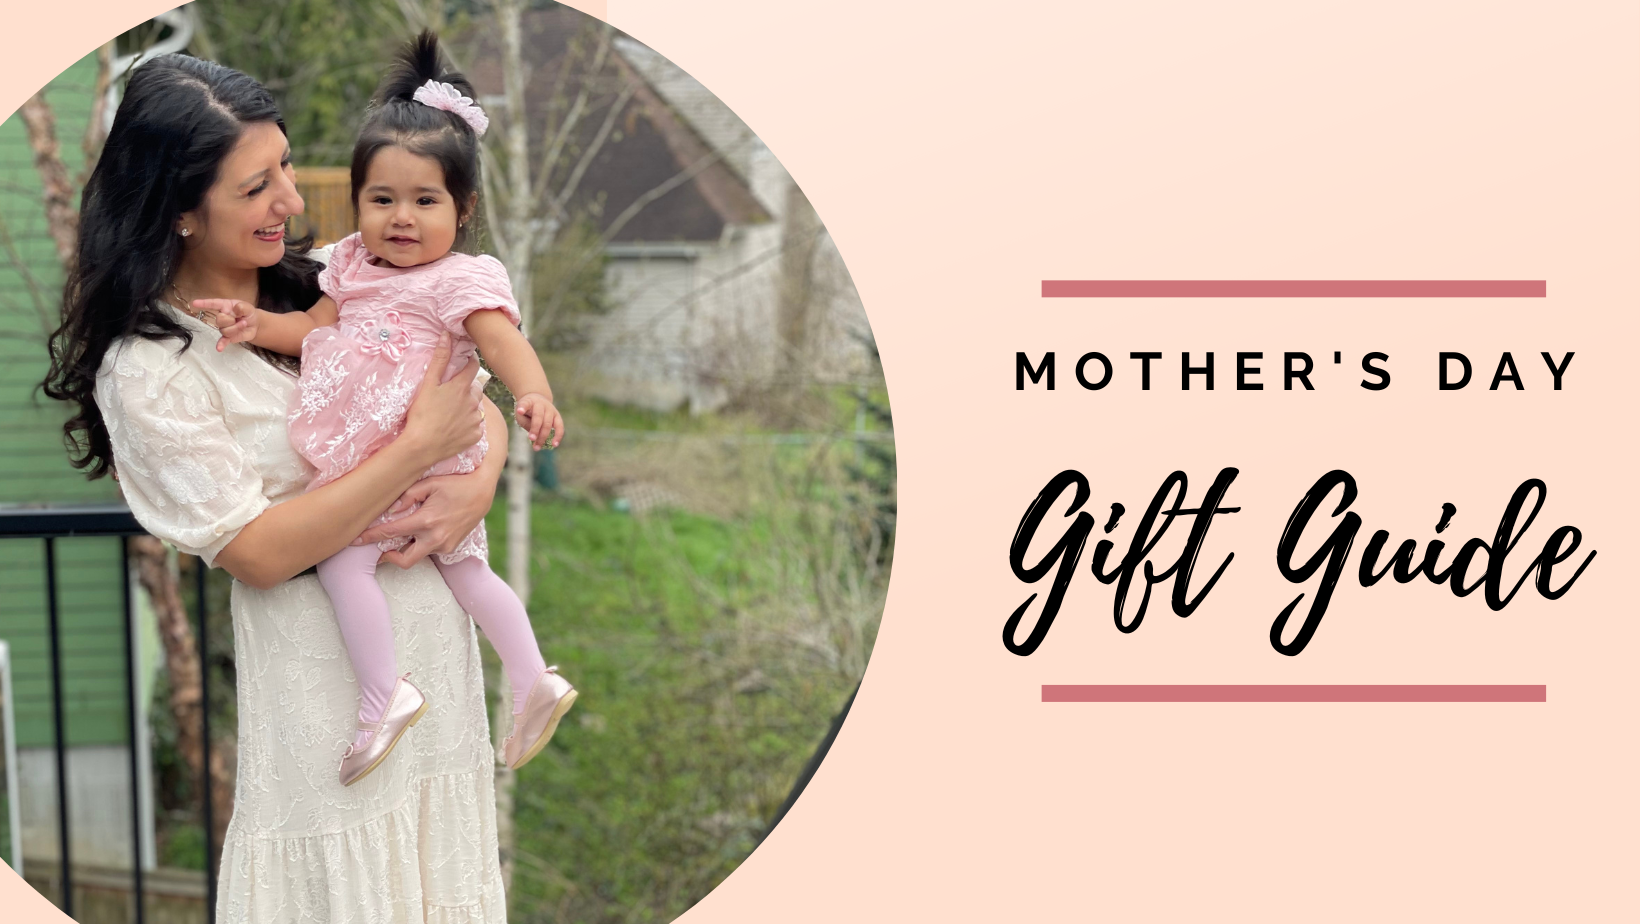 Meaningful Mother's Day Gift Ideas - My Closet Edit